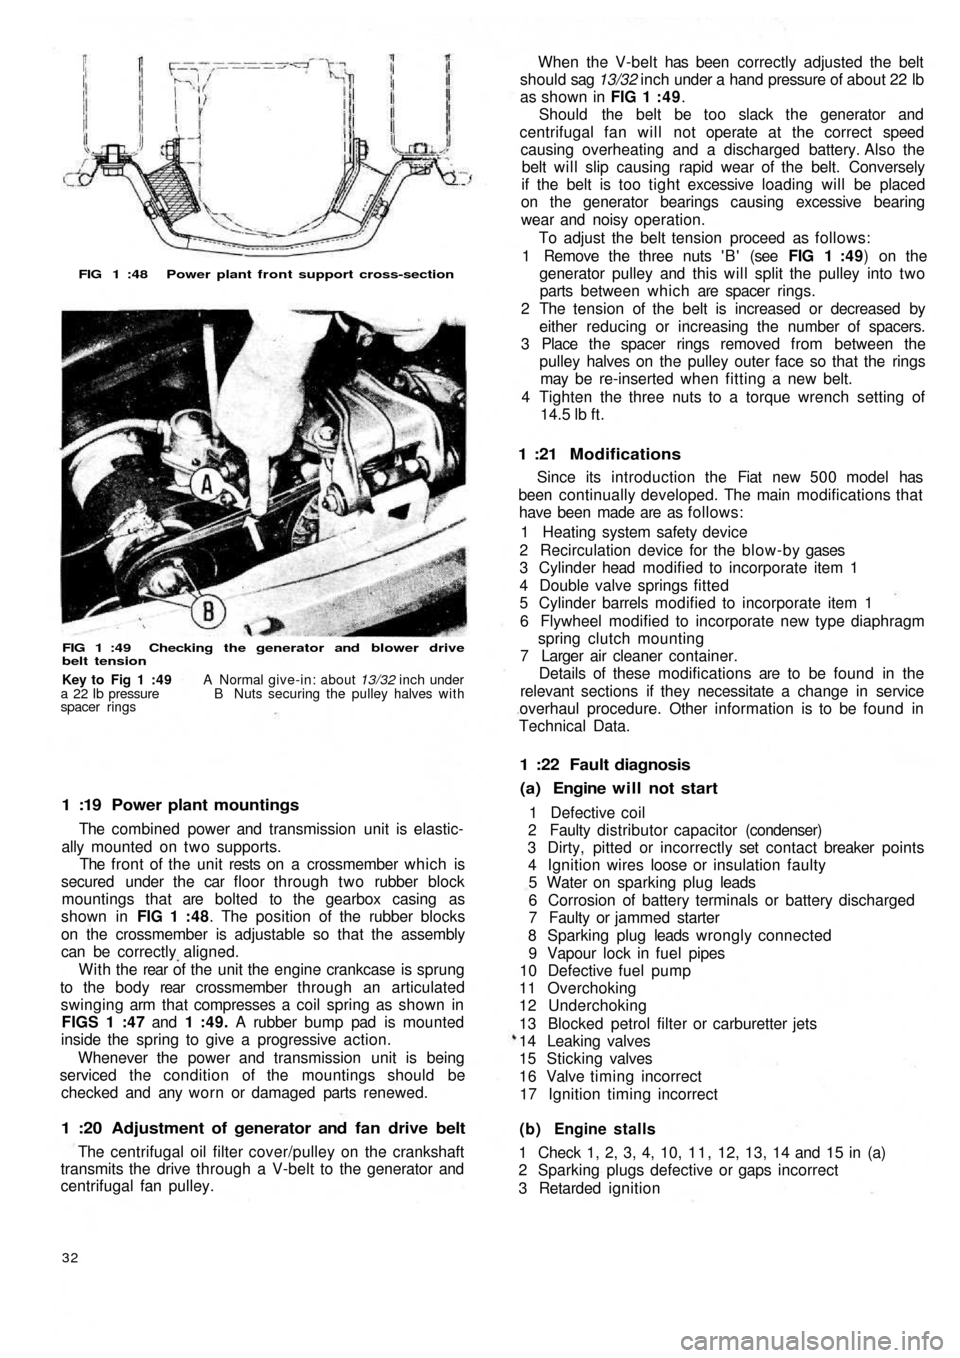 FIAT 500 1966 1.G Workshop Manual FIG 1 :48  Power plant front support cross-section
FIG 1 :49  Checking  the generator and  blower drive
belt tension
1 :19  Power plant mountings
The combined power and transmission unit is elastic-
a